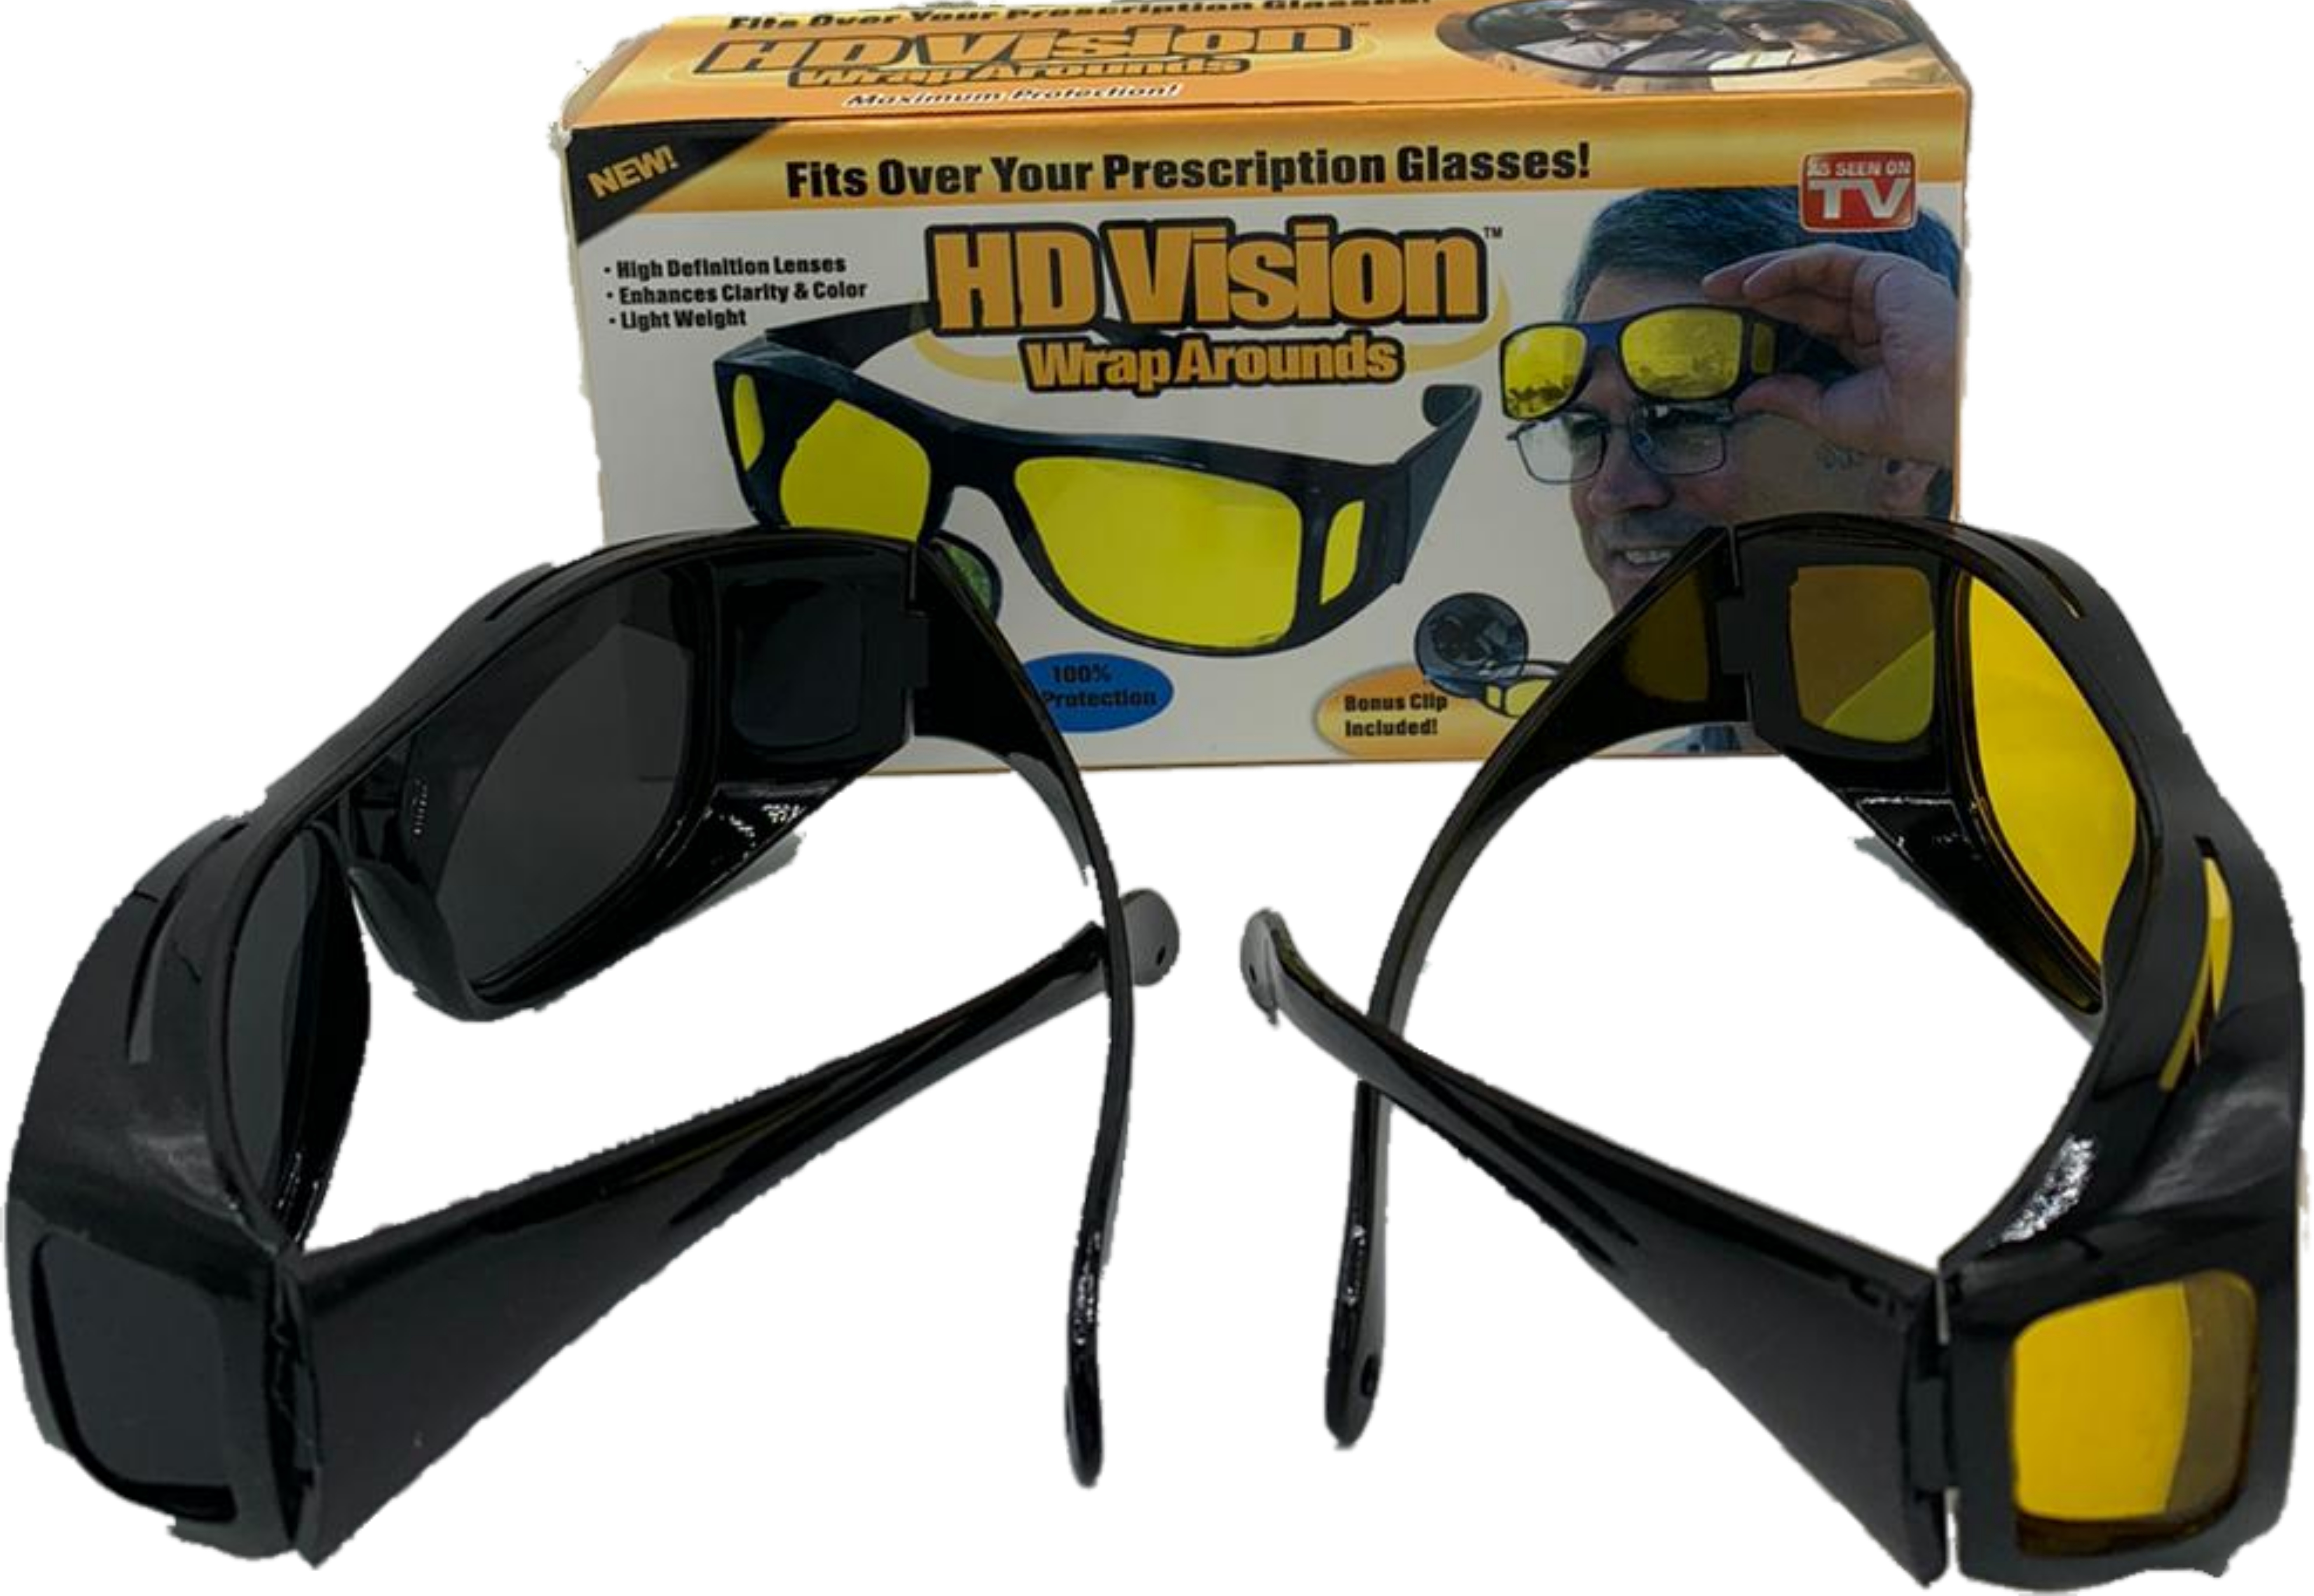 HD Night & Day Vision Wraparound Sunglasses, As Seen on TV, Fits over Glasses Bonus Pair Included - image 3 of 6